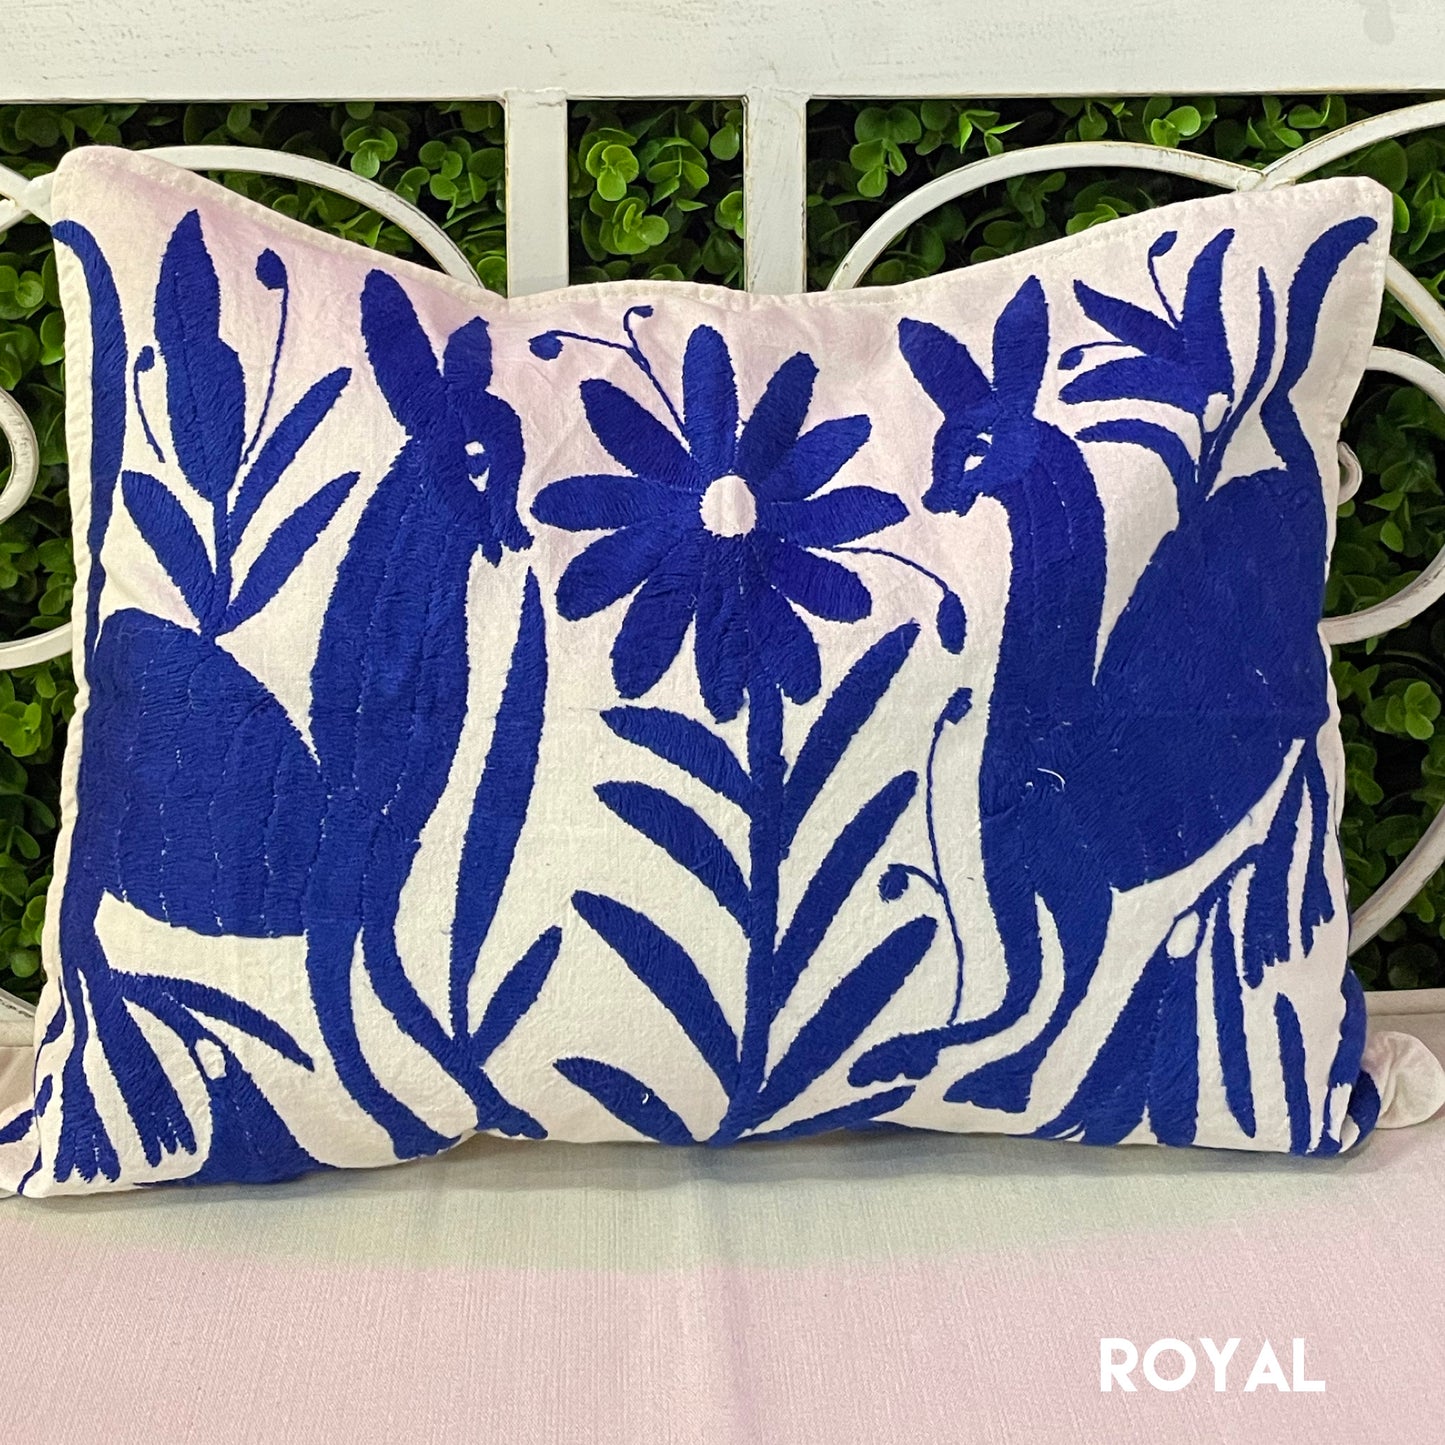 Mexican Embroidered Otomi Pillow Cover